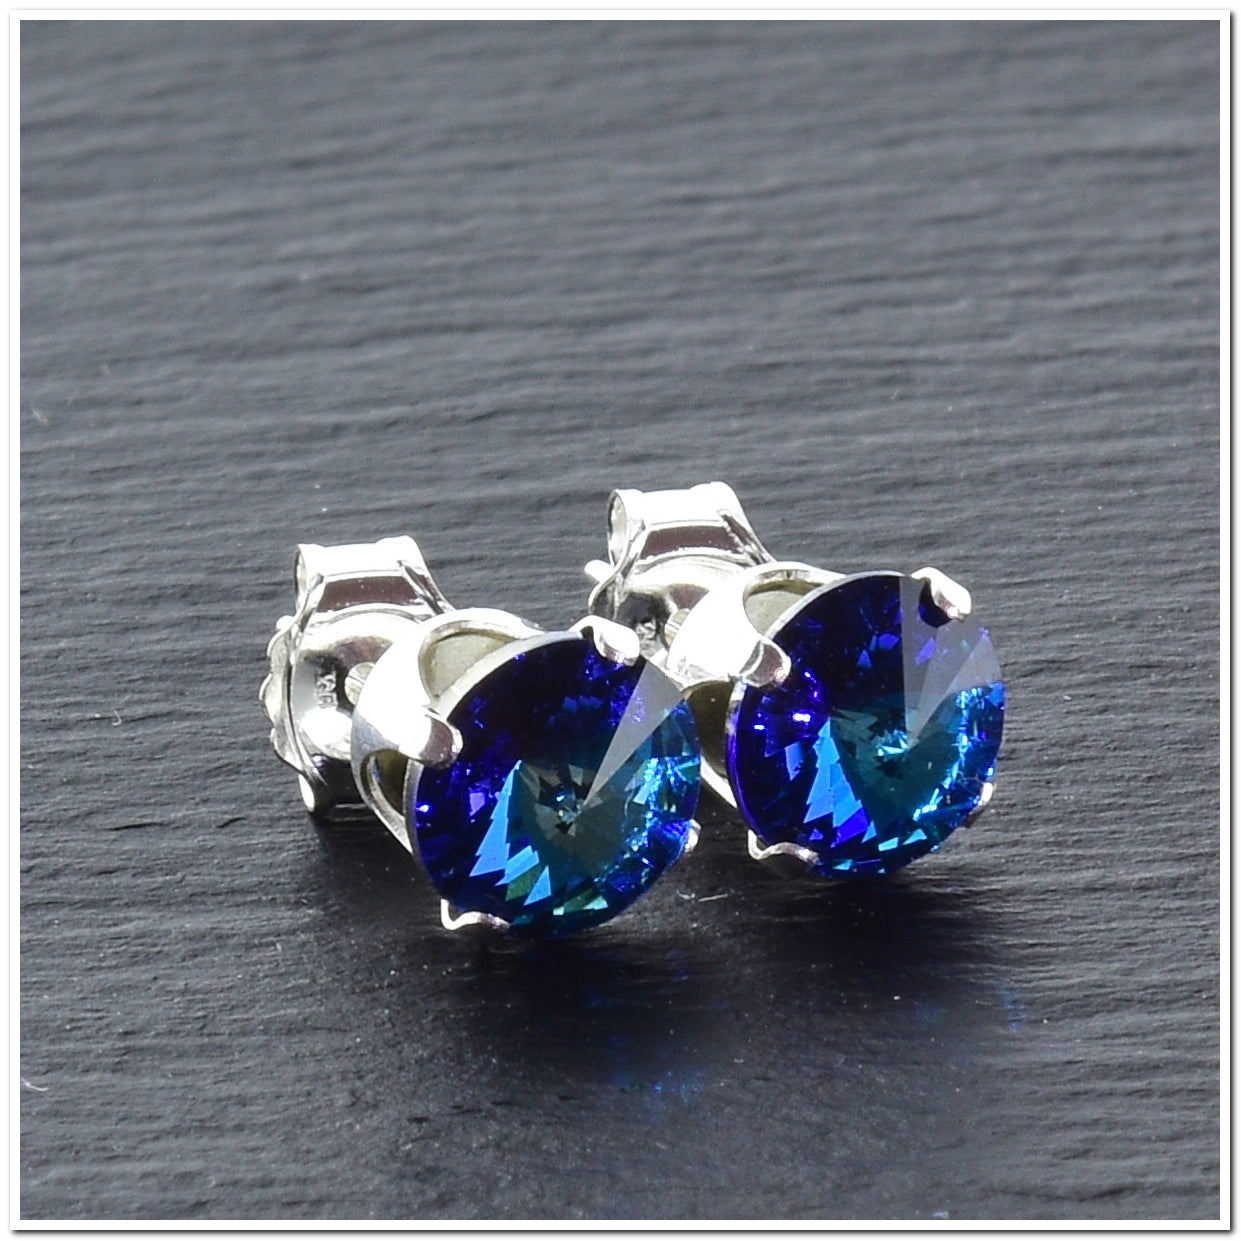 pewterhooter® Women's Classic Collection 925 Sterling silver earrings with brilliant Bermuda Blue crystals, packaged in a gift box for any occasion.